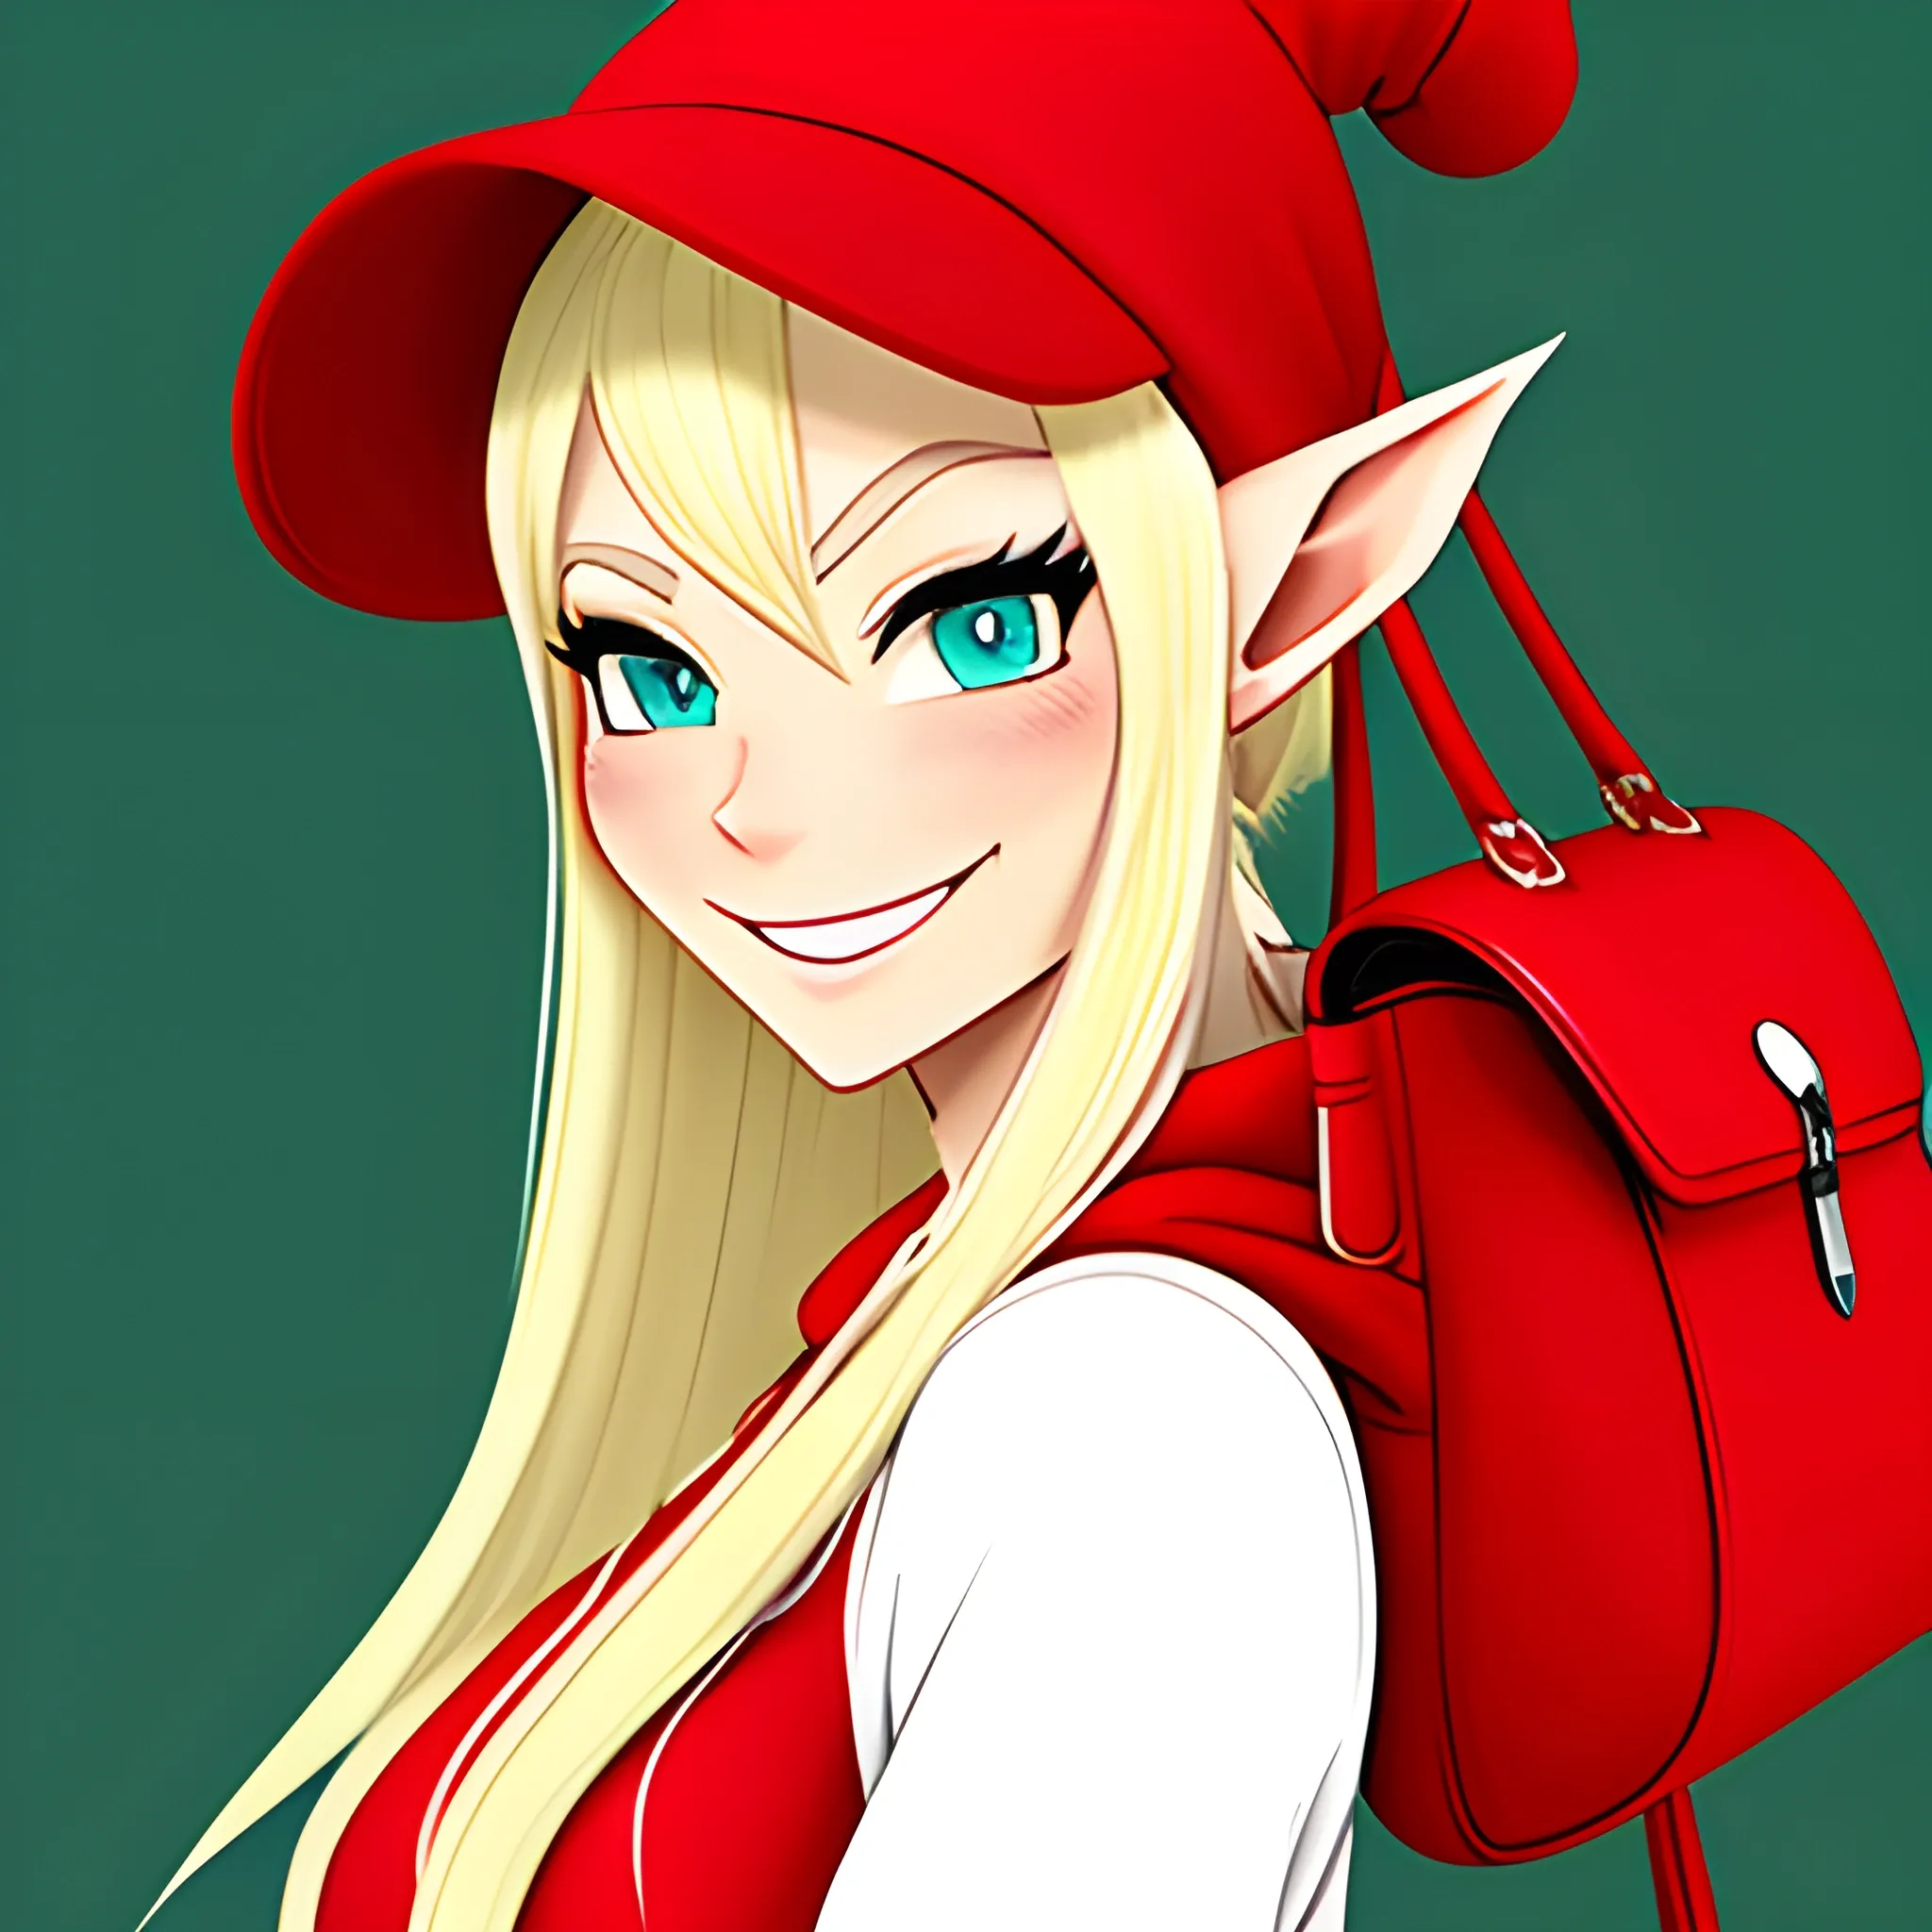  have elf ears,girl,double ponytail hair,red hat and hooded clothes and red schoolbag,happy expression, Cartoon, Cartoon,very cute,blond hair,little kid,happy face